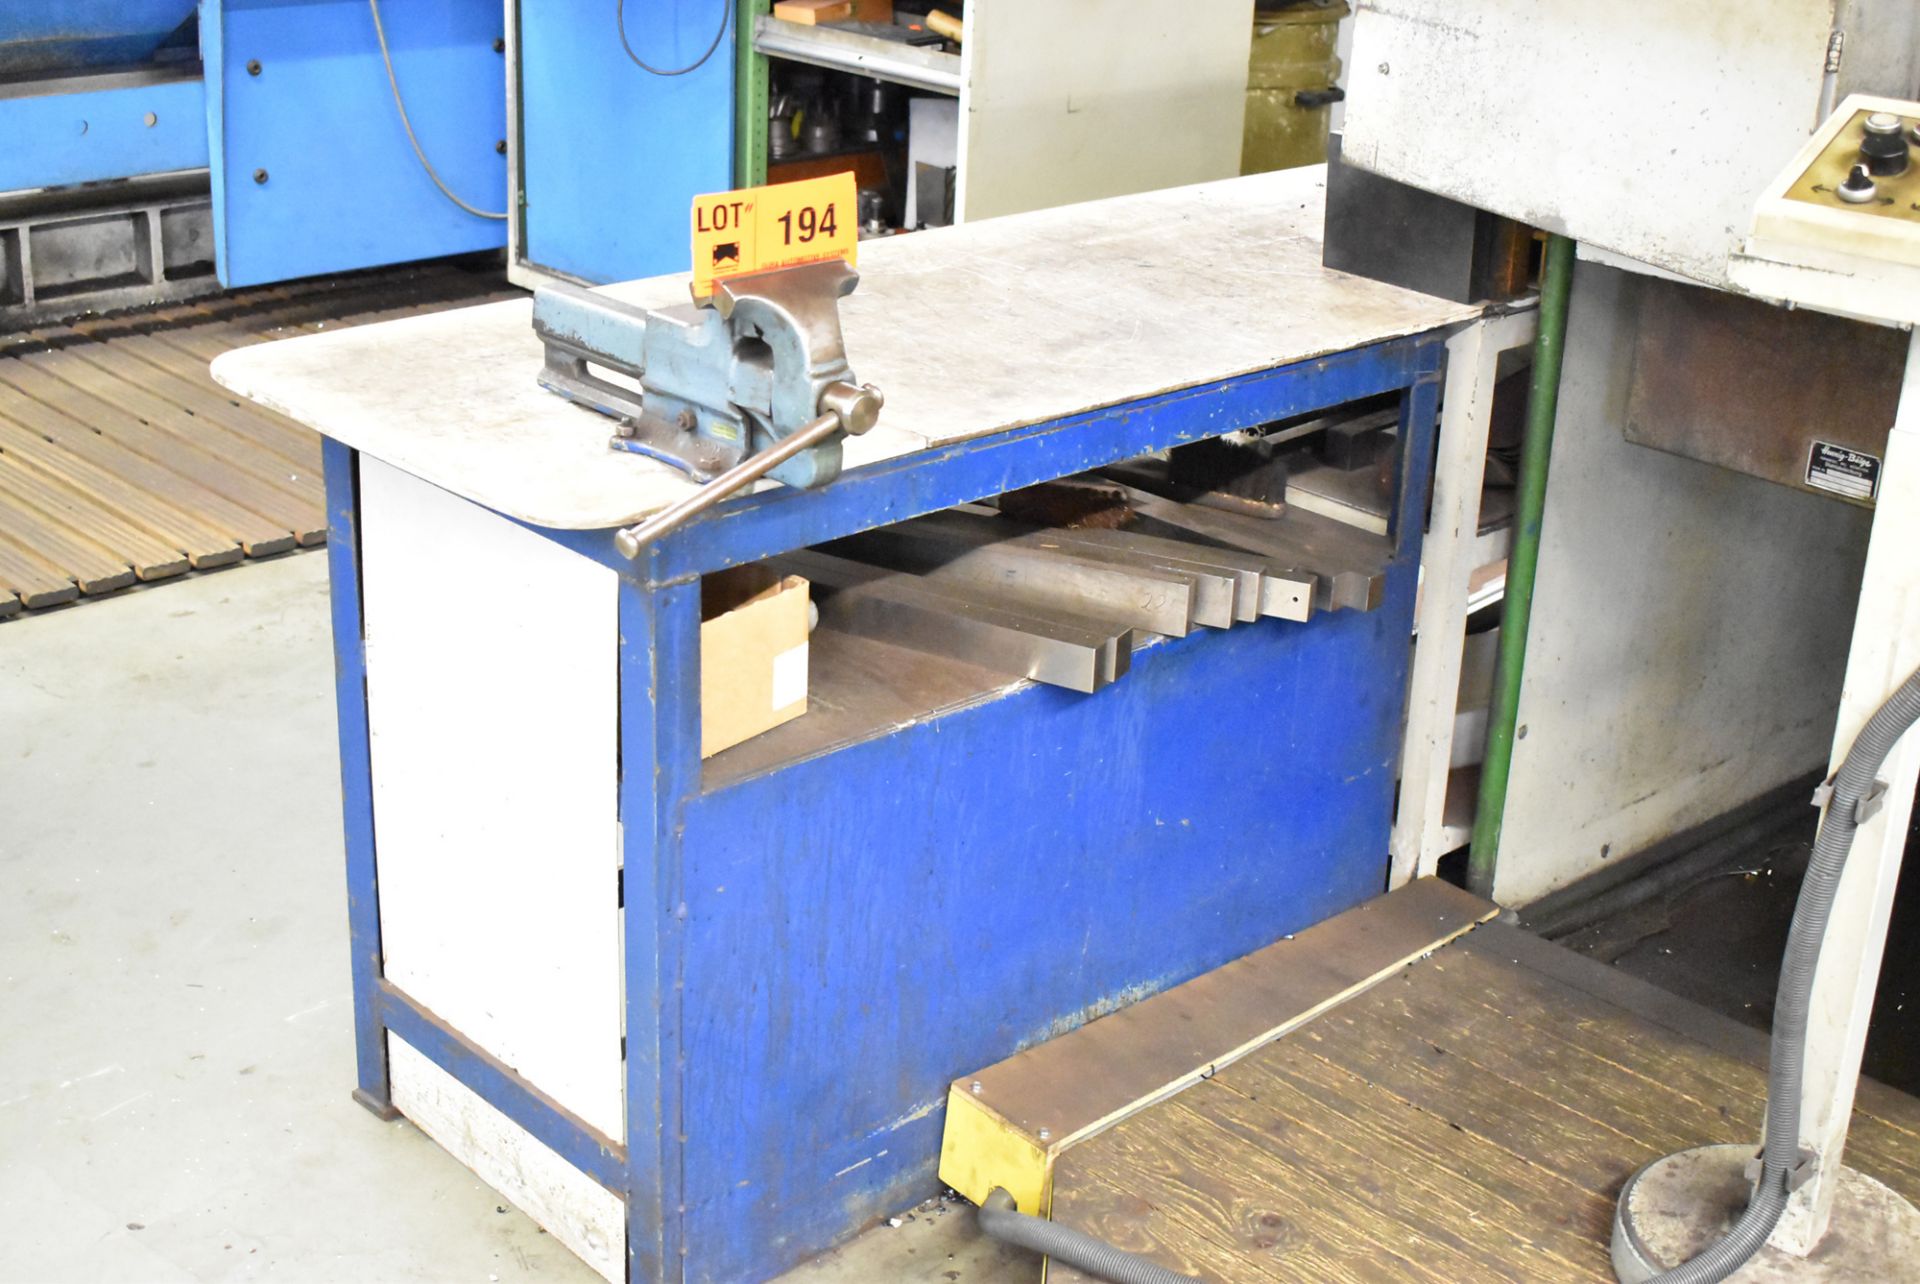 LOT/ WORKBENCHES WITH CONTENTS AND 120 MM VISE (BAU 13) [RIGGING FEE FOR LOT #194 - € 55 PLUS